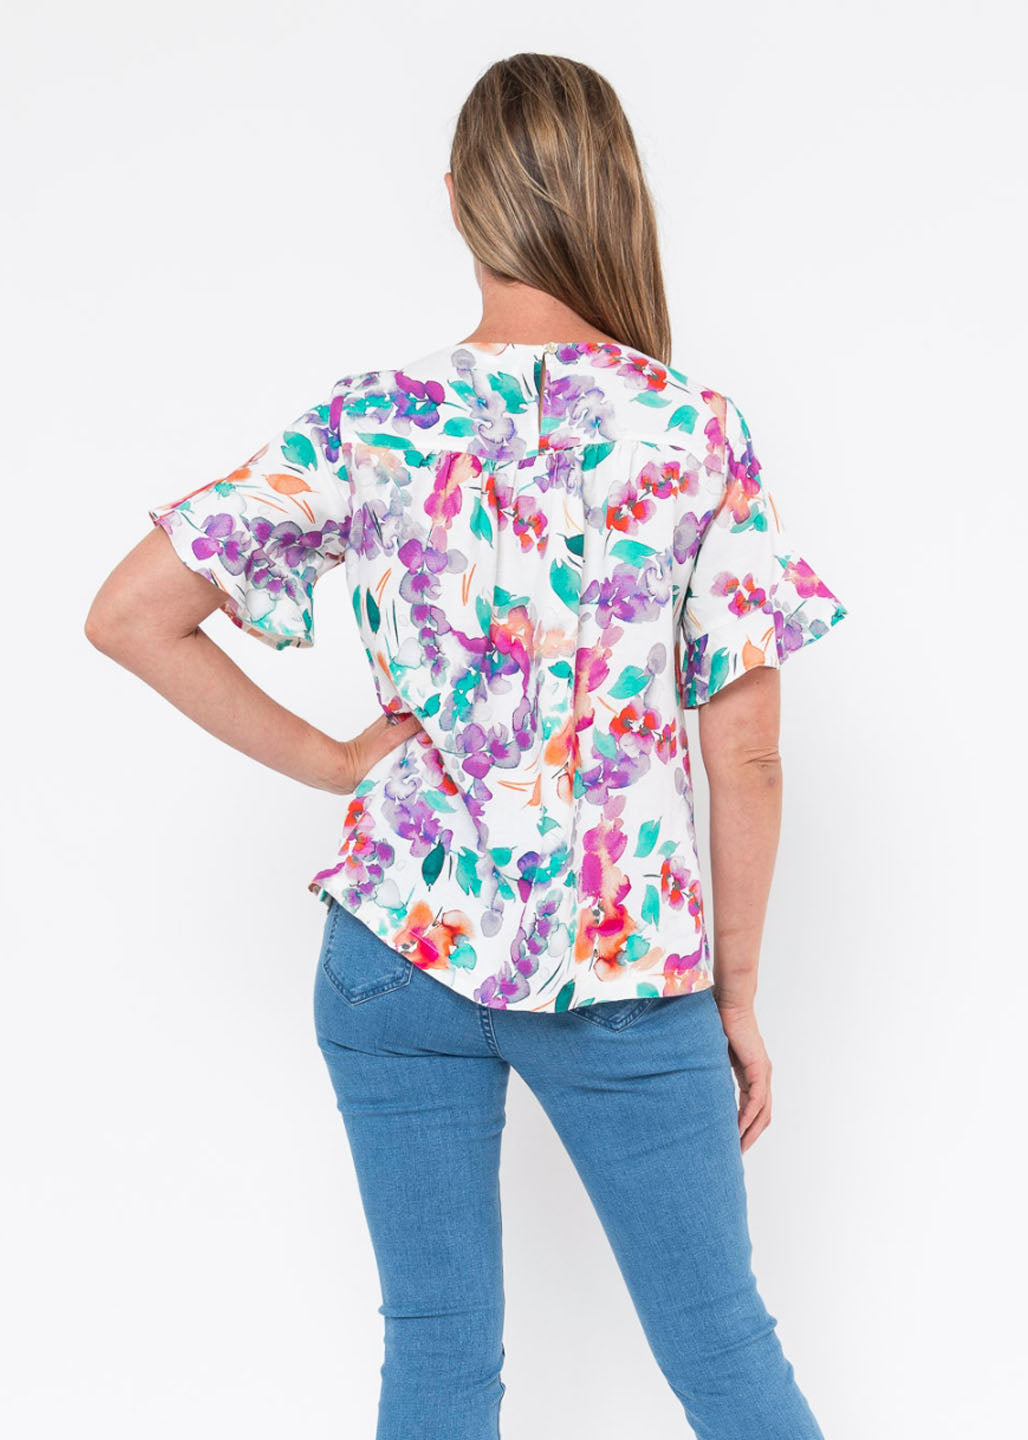 JUMP PAINTERLY FLORAL TOP